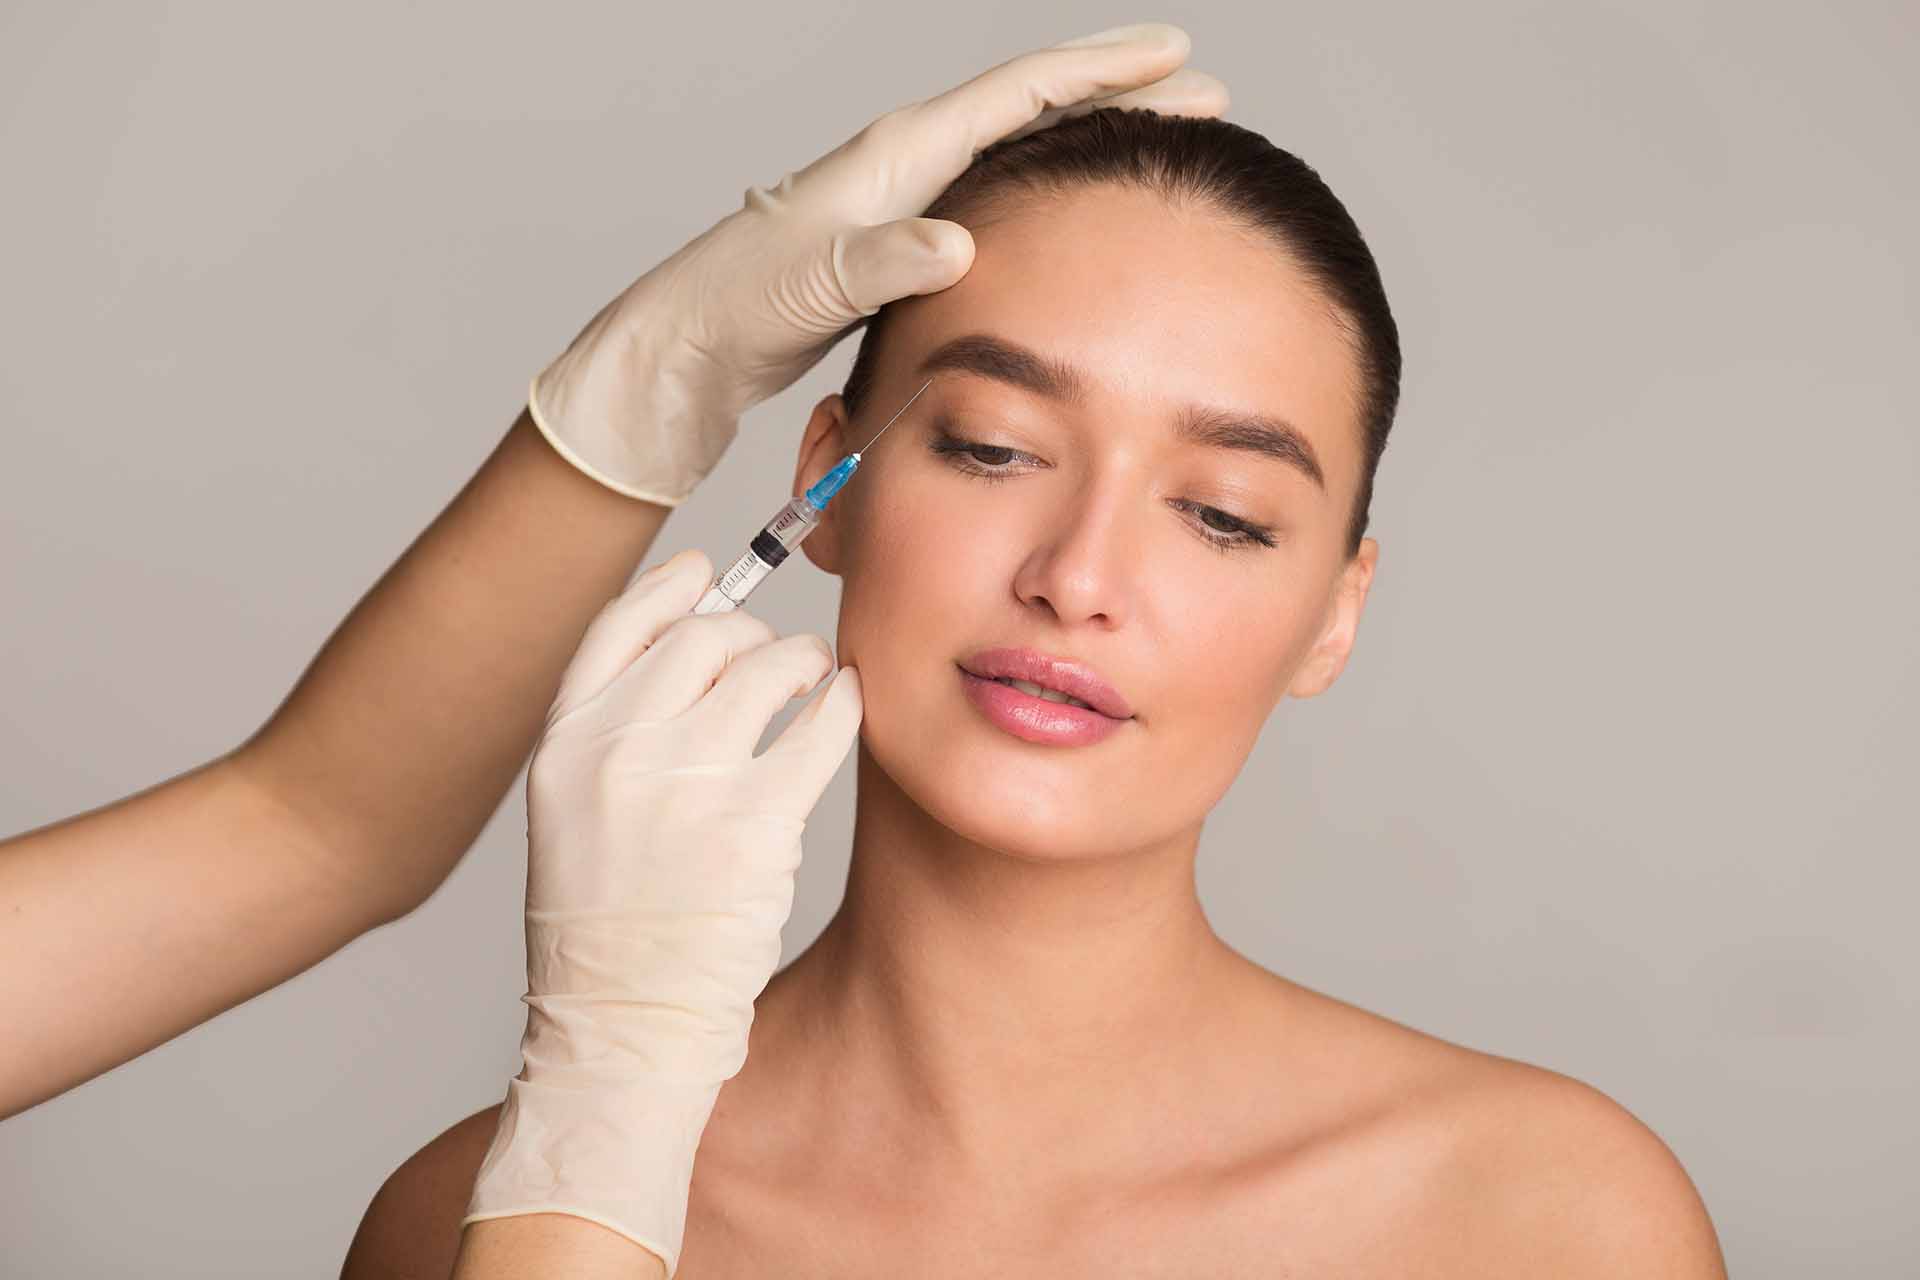 What Should You Avoid Before Botox?